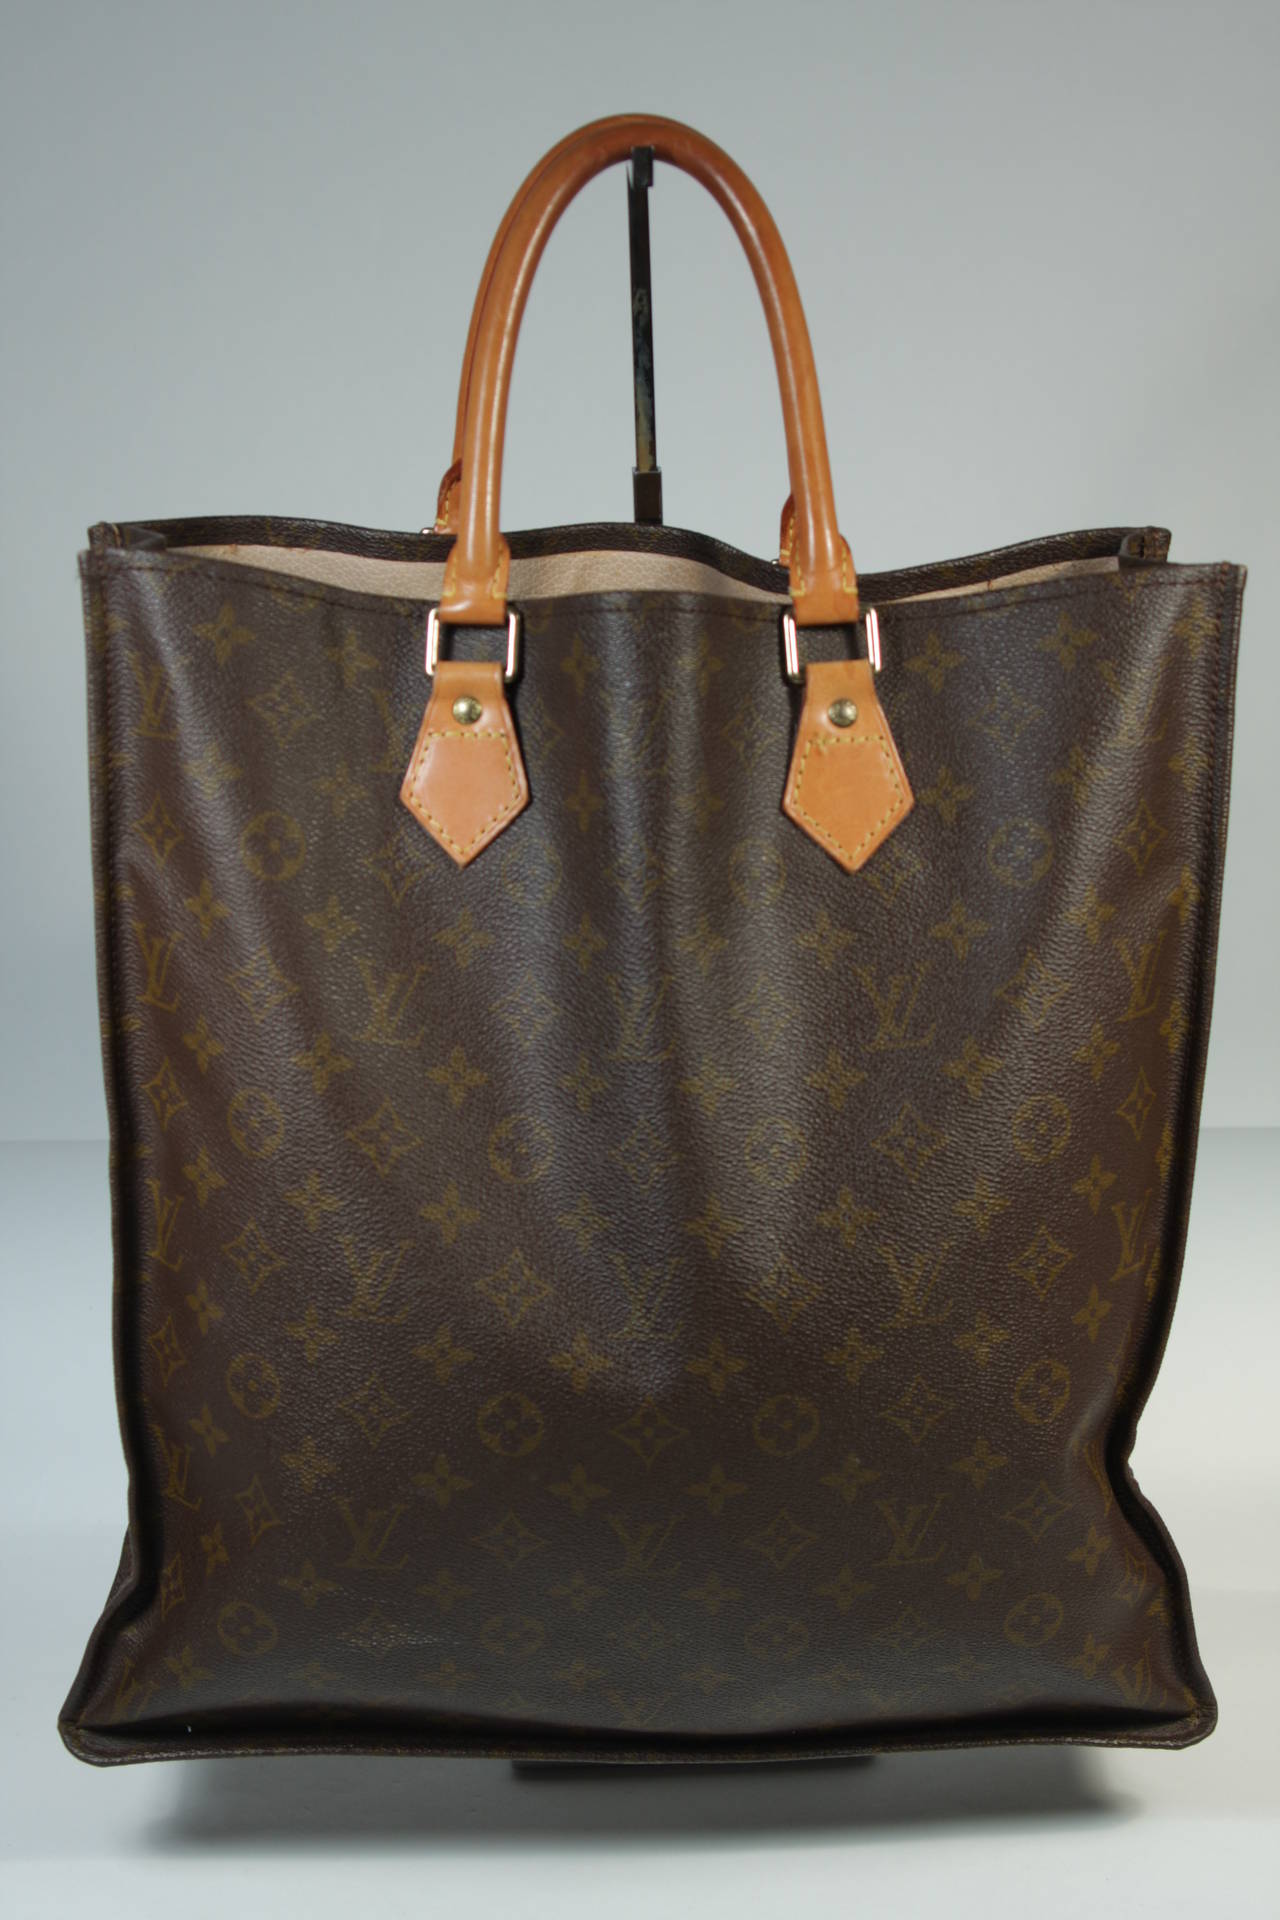 This vintage Louis Vuitton handbag is available for viewing at our Beverly Hills Boutique. We offer a large selection of evening gowns and luxury garments.

This Louis Vuitton shopper features the classic monogram style print and gold hardware.